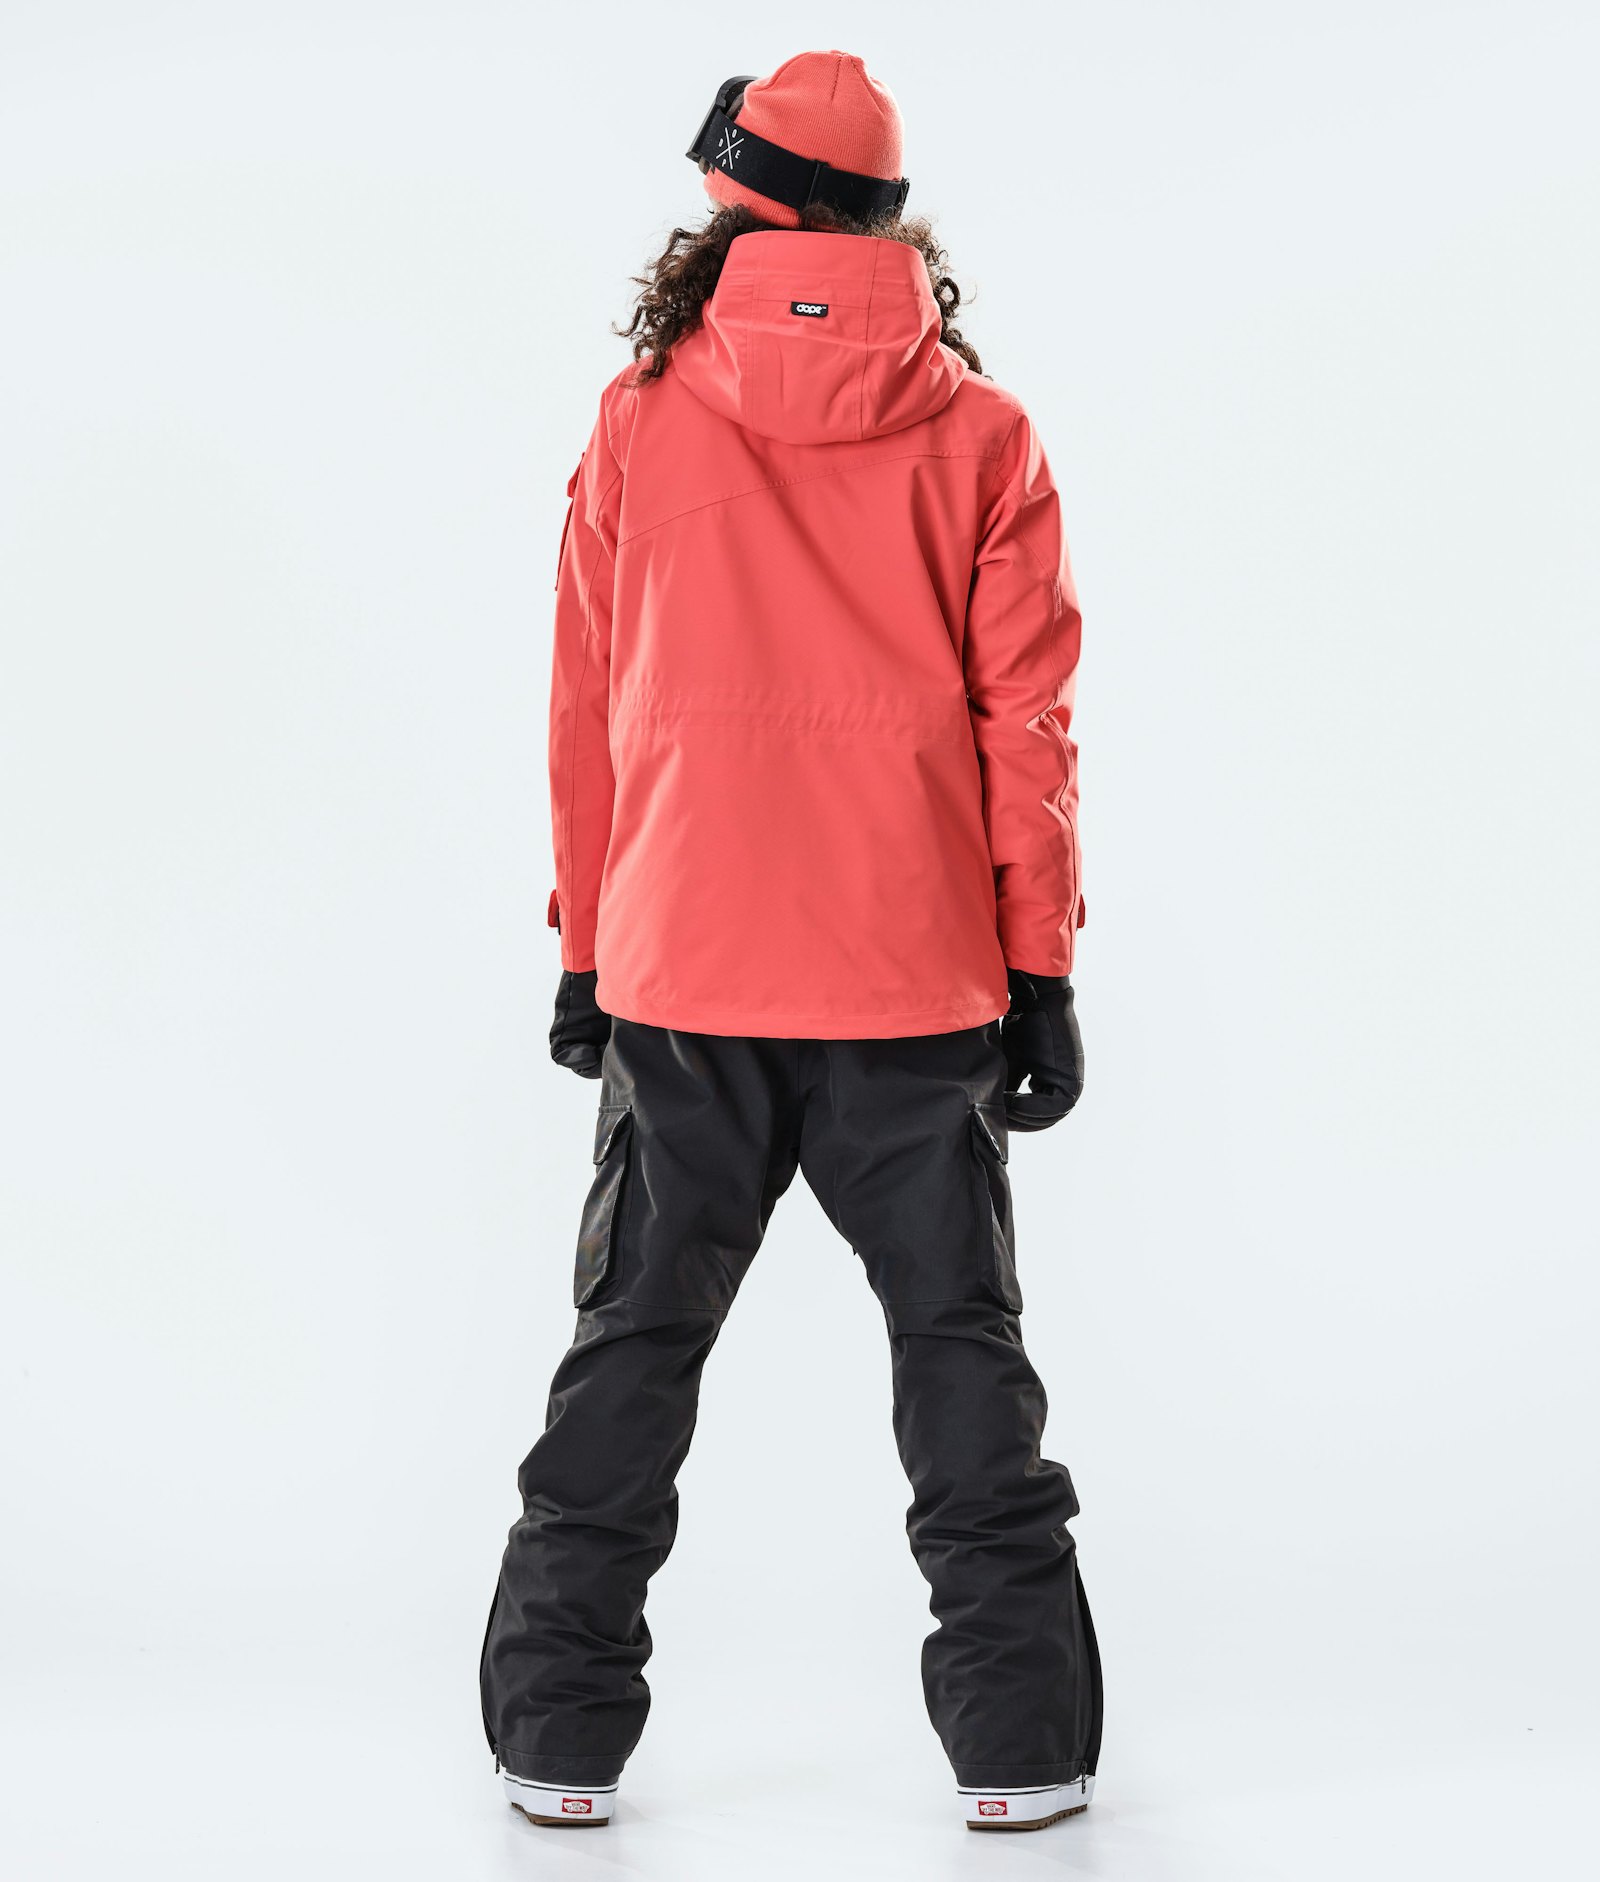 Adept W 2020 Giacca Snowboard Donna Coral